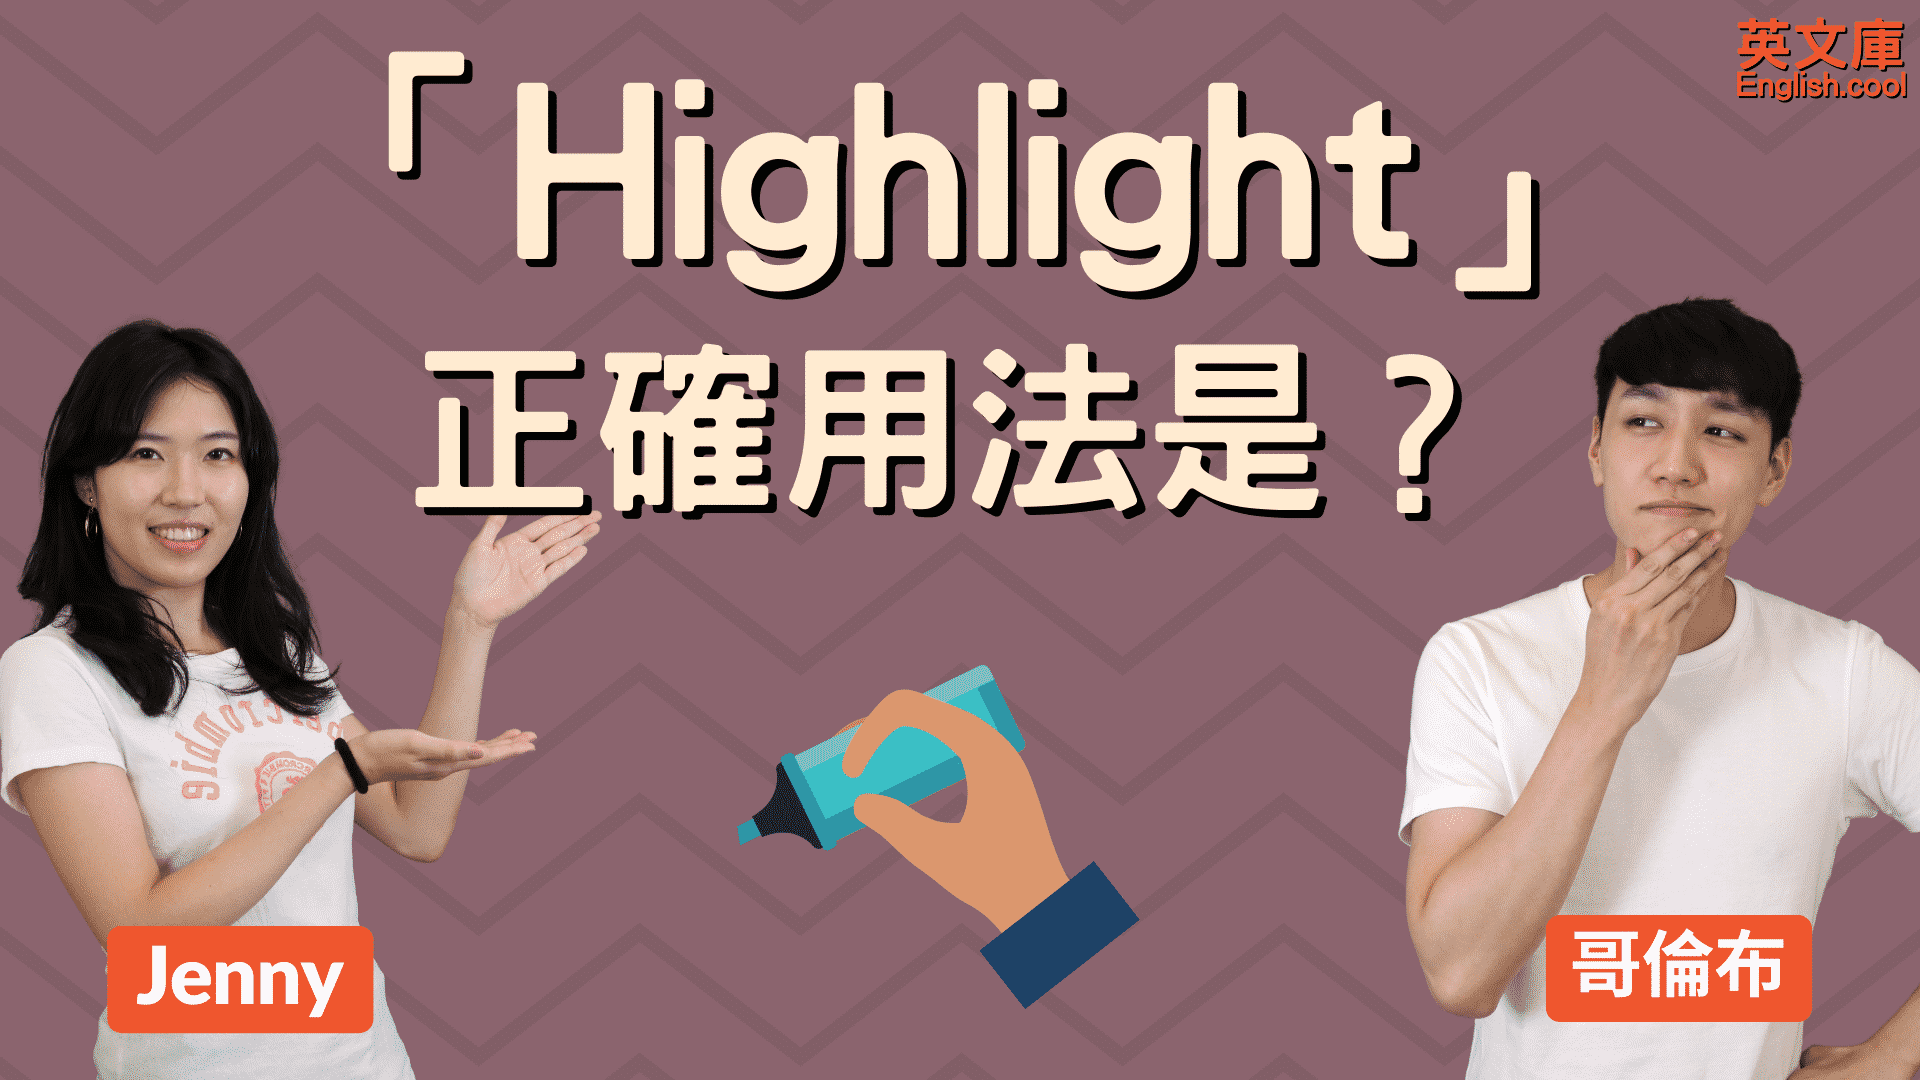 You are currently viewing 「被highlight」 是正確英文嗎？「highlight」正確用法是？